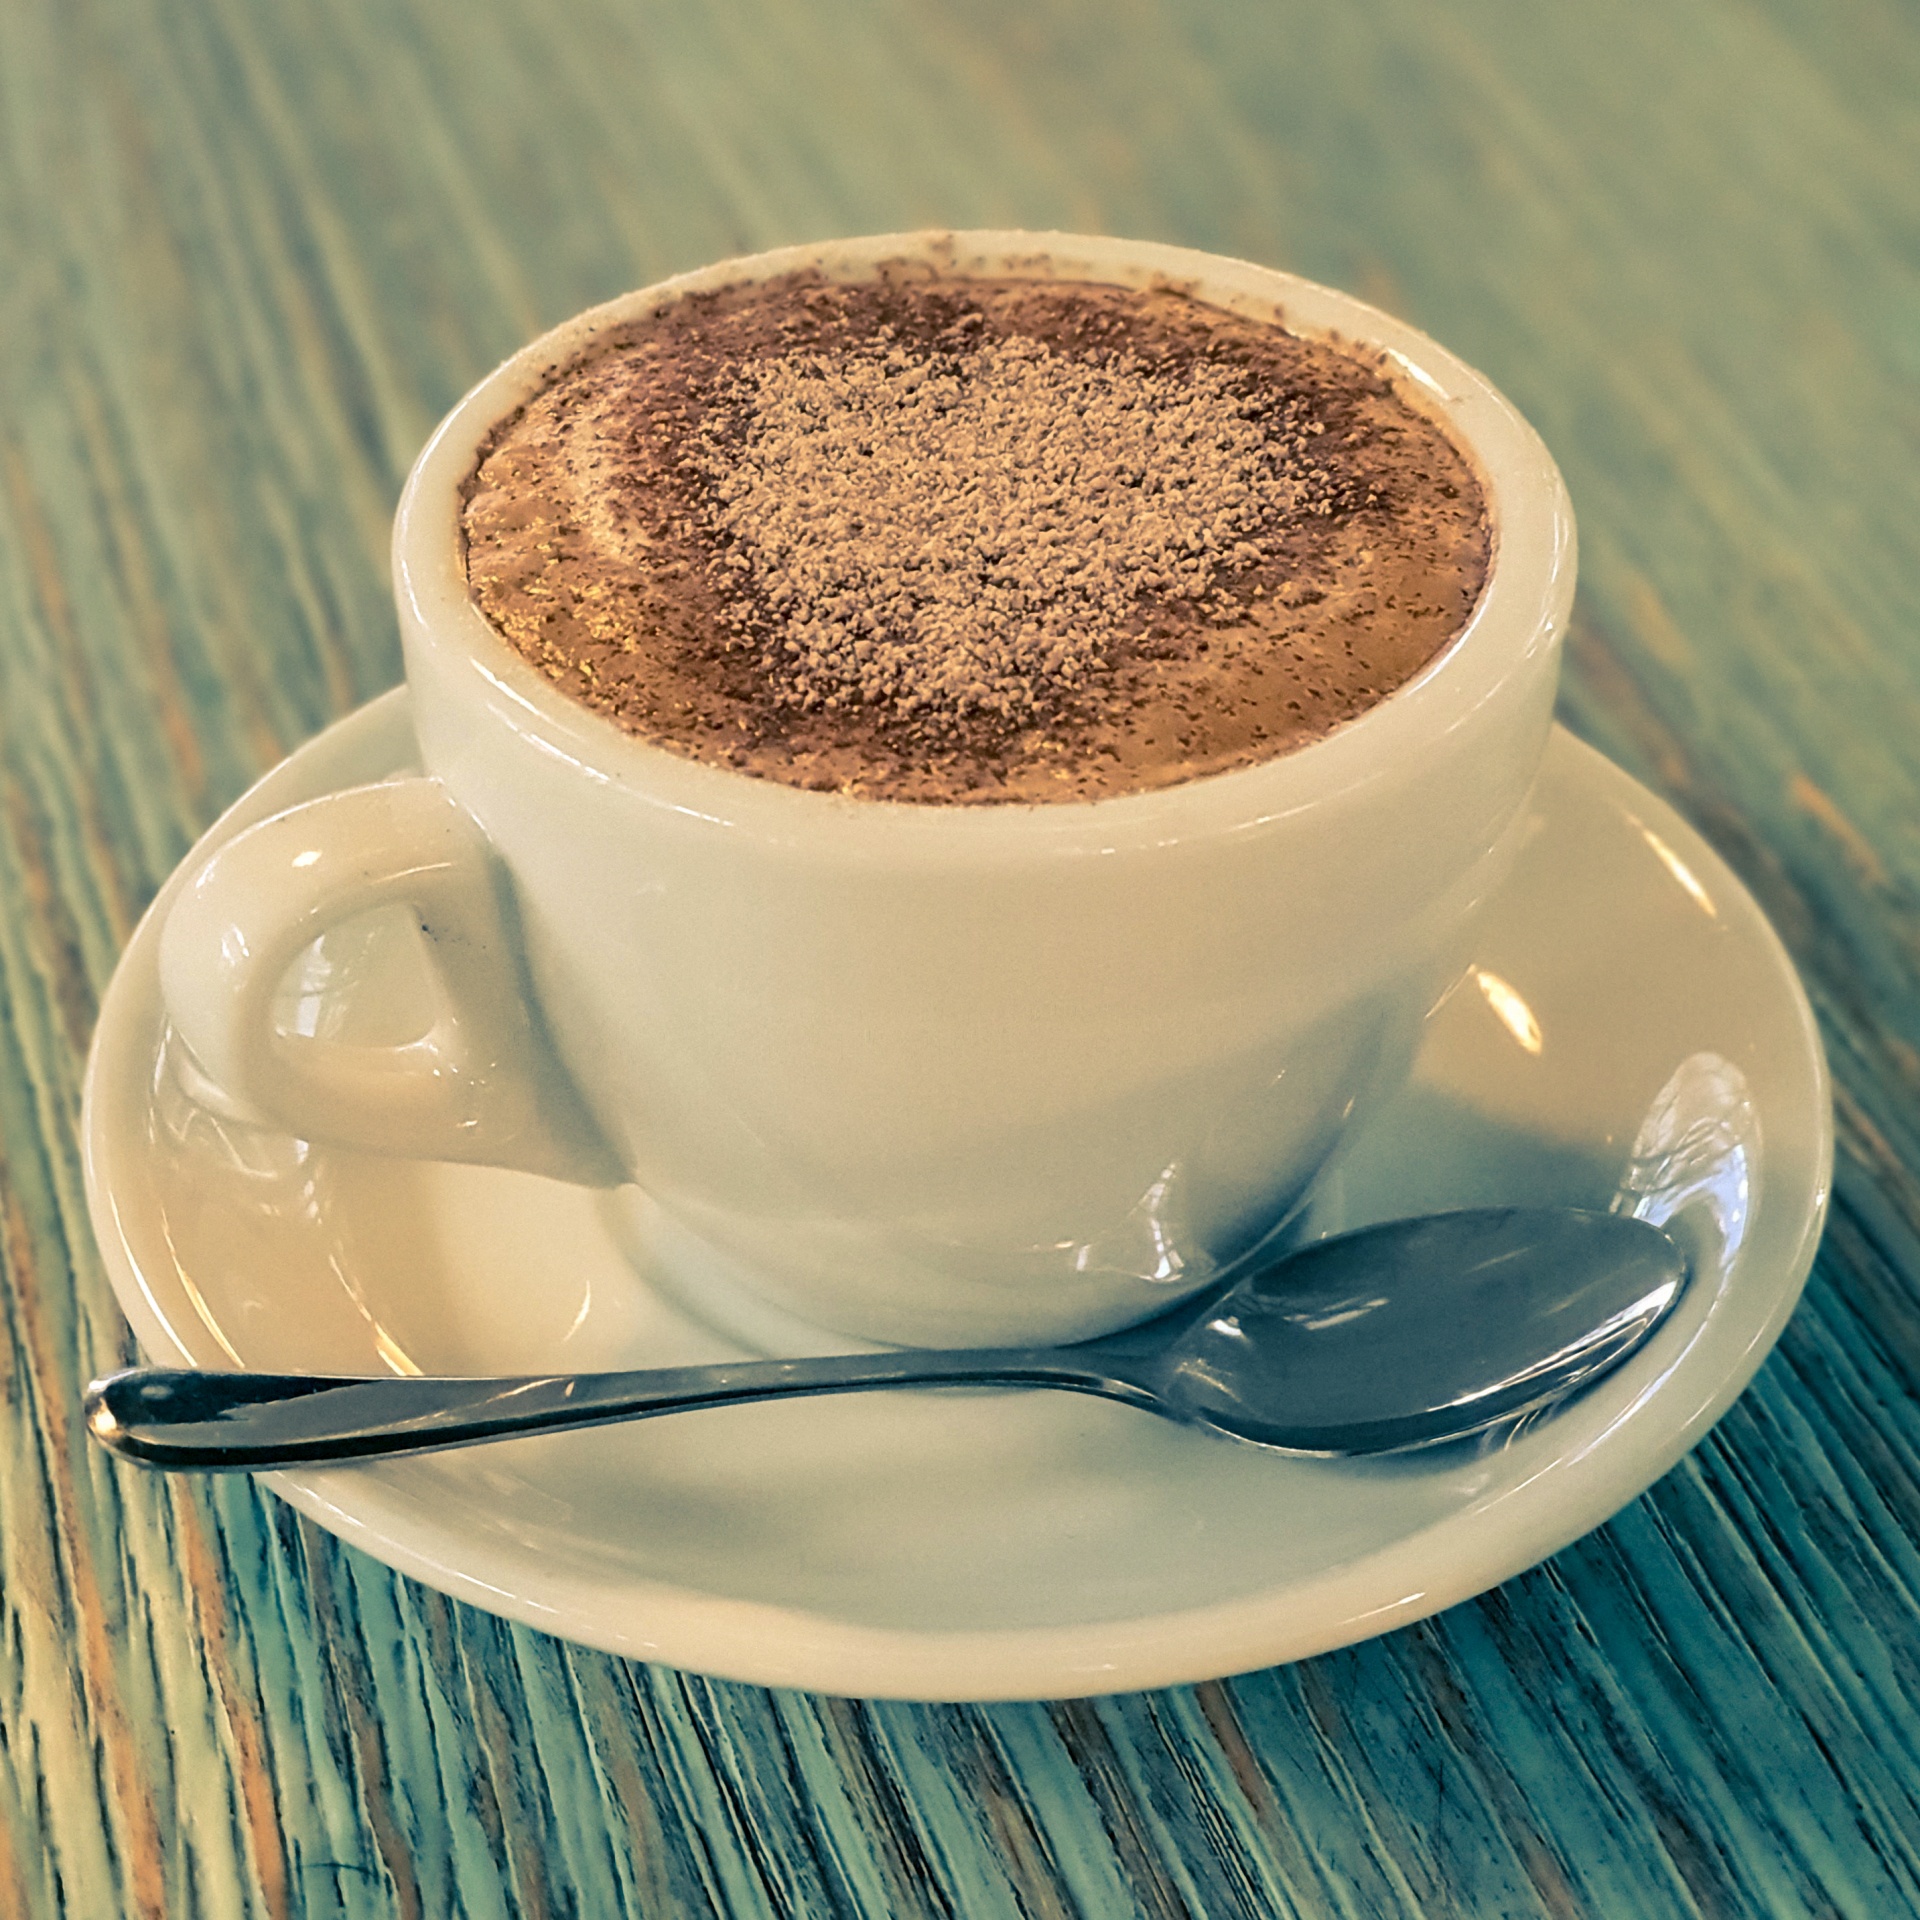 Free Cup of cappuccino coffee - Image